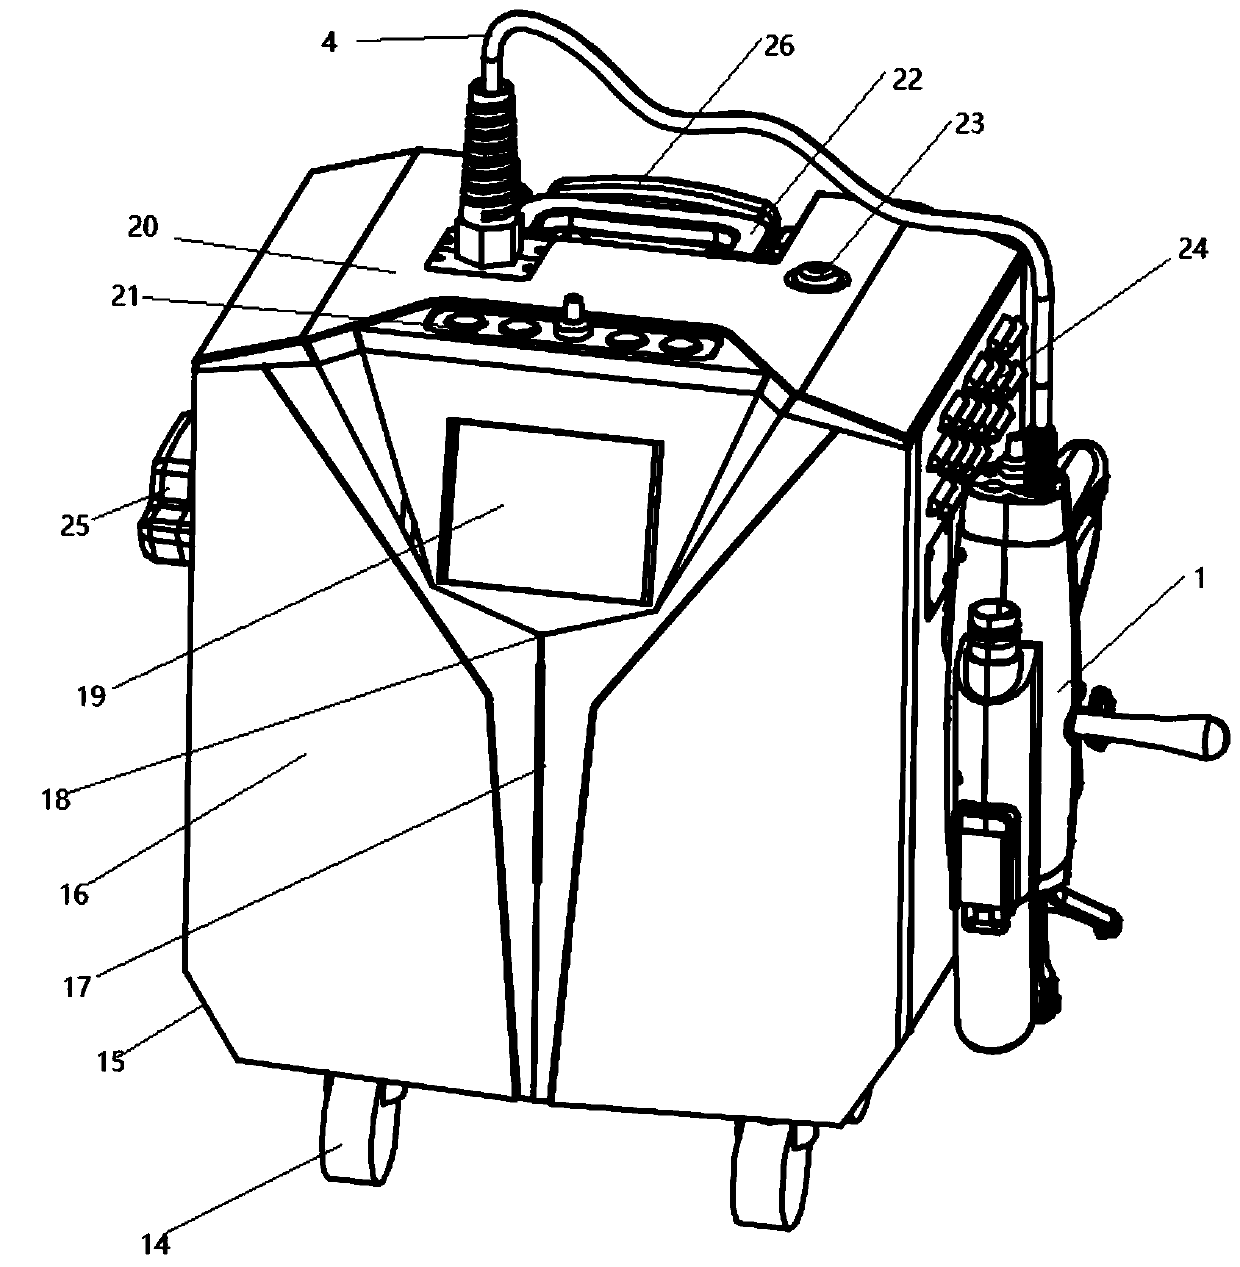 Pull-lever-type portable laser cleaning machine and cleaning method